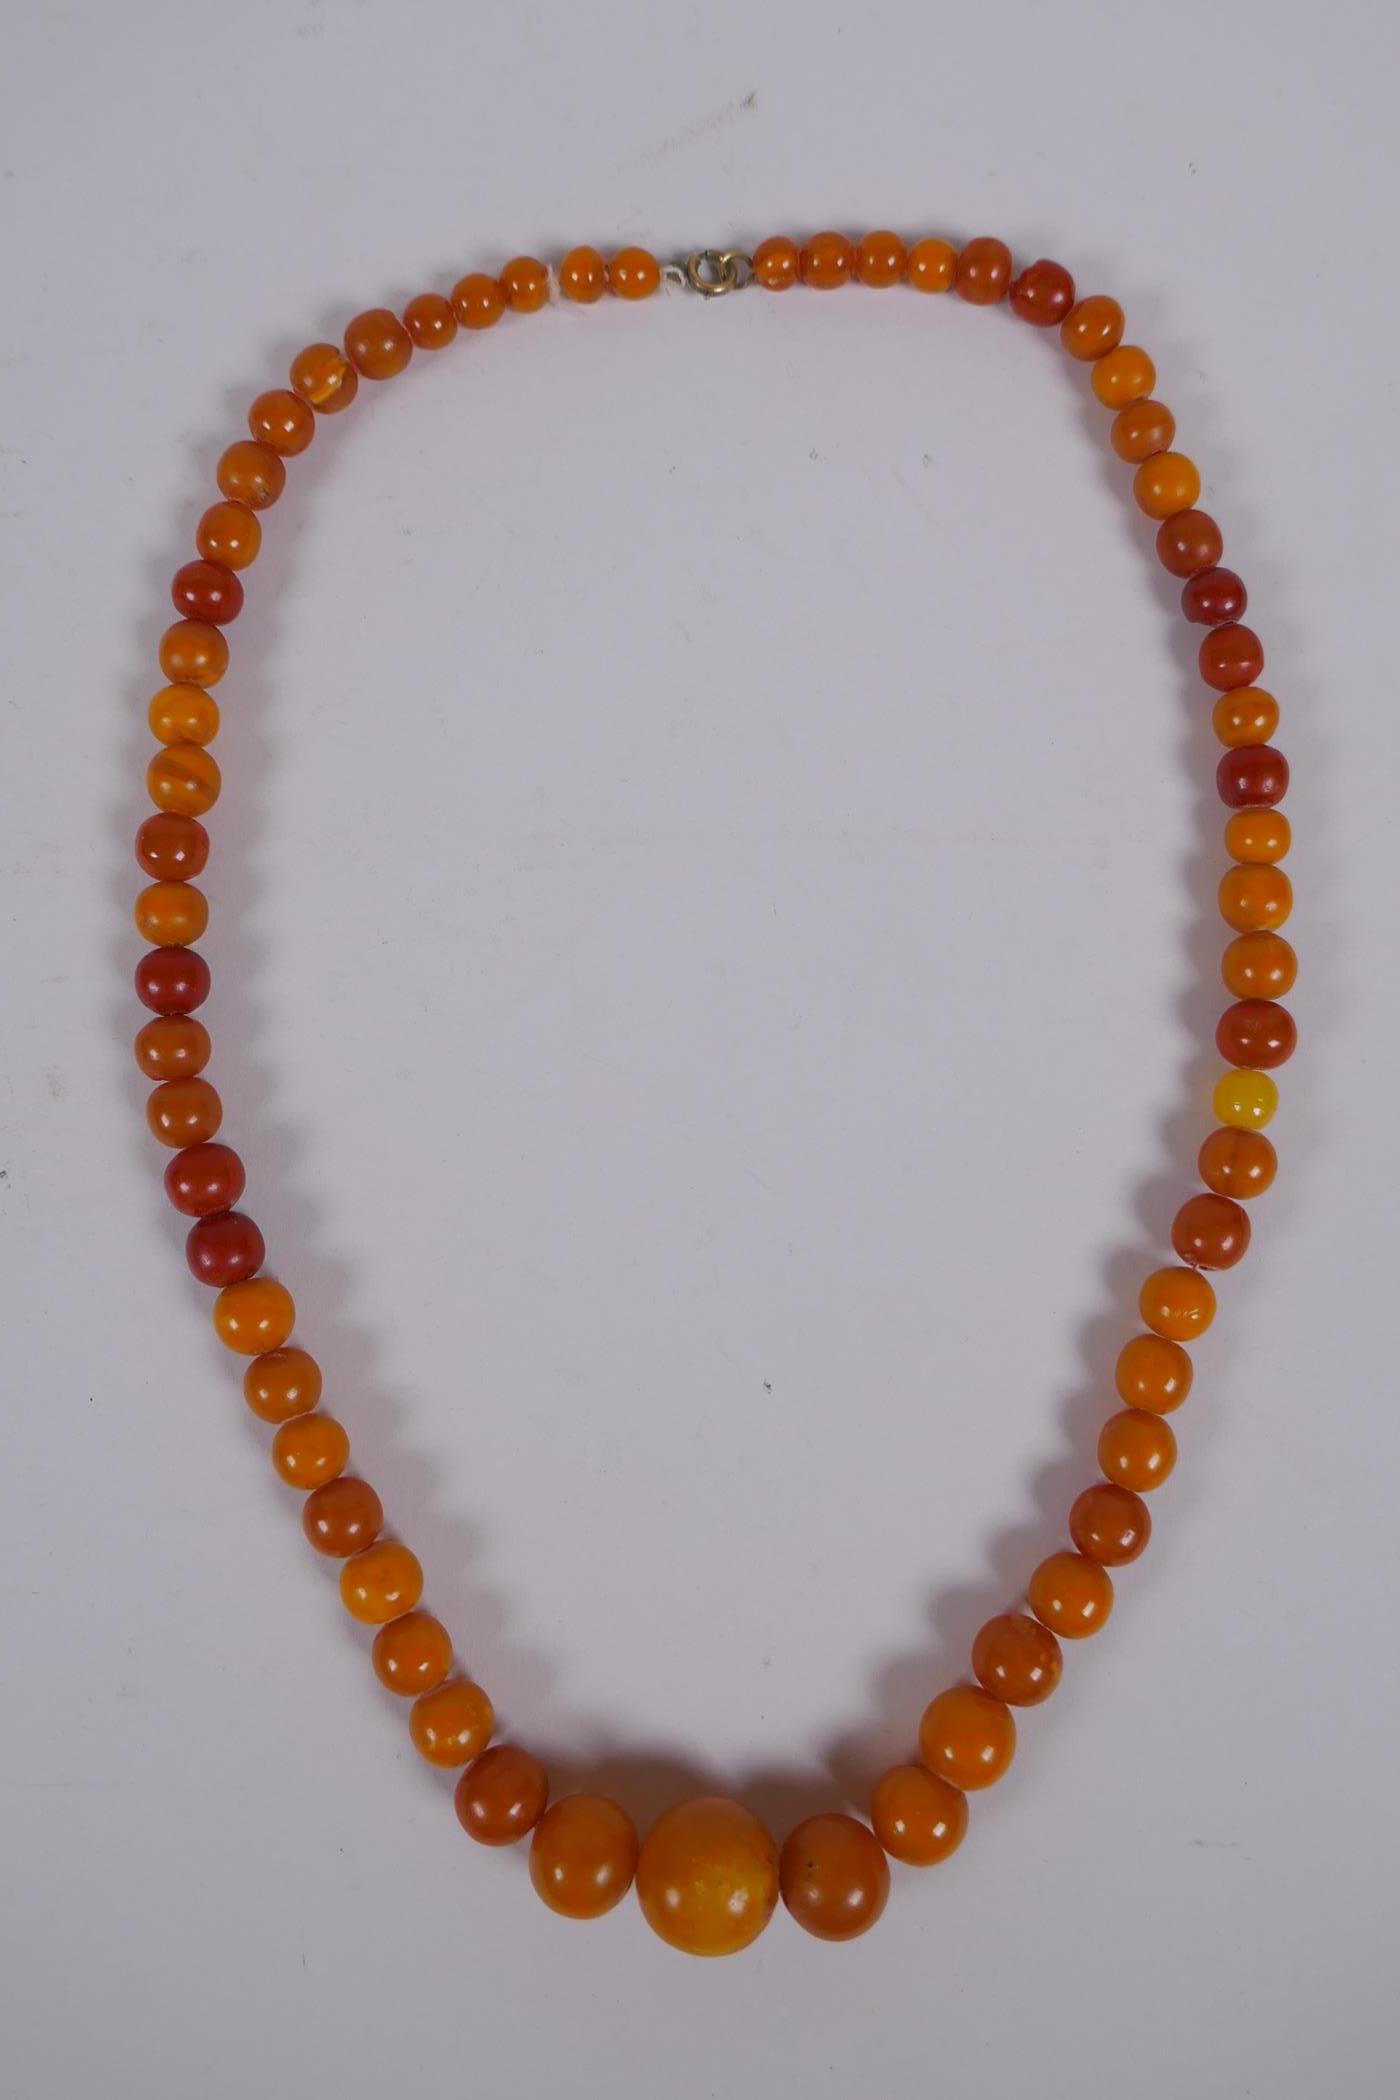 A graduated amber bead necklace, 54cm long